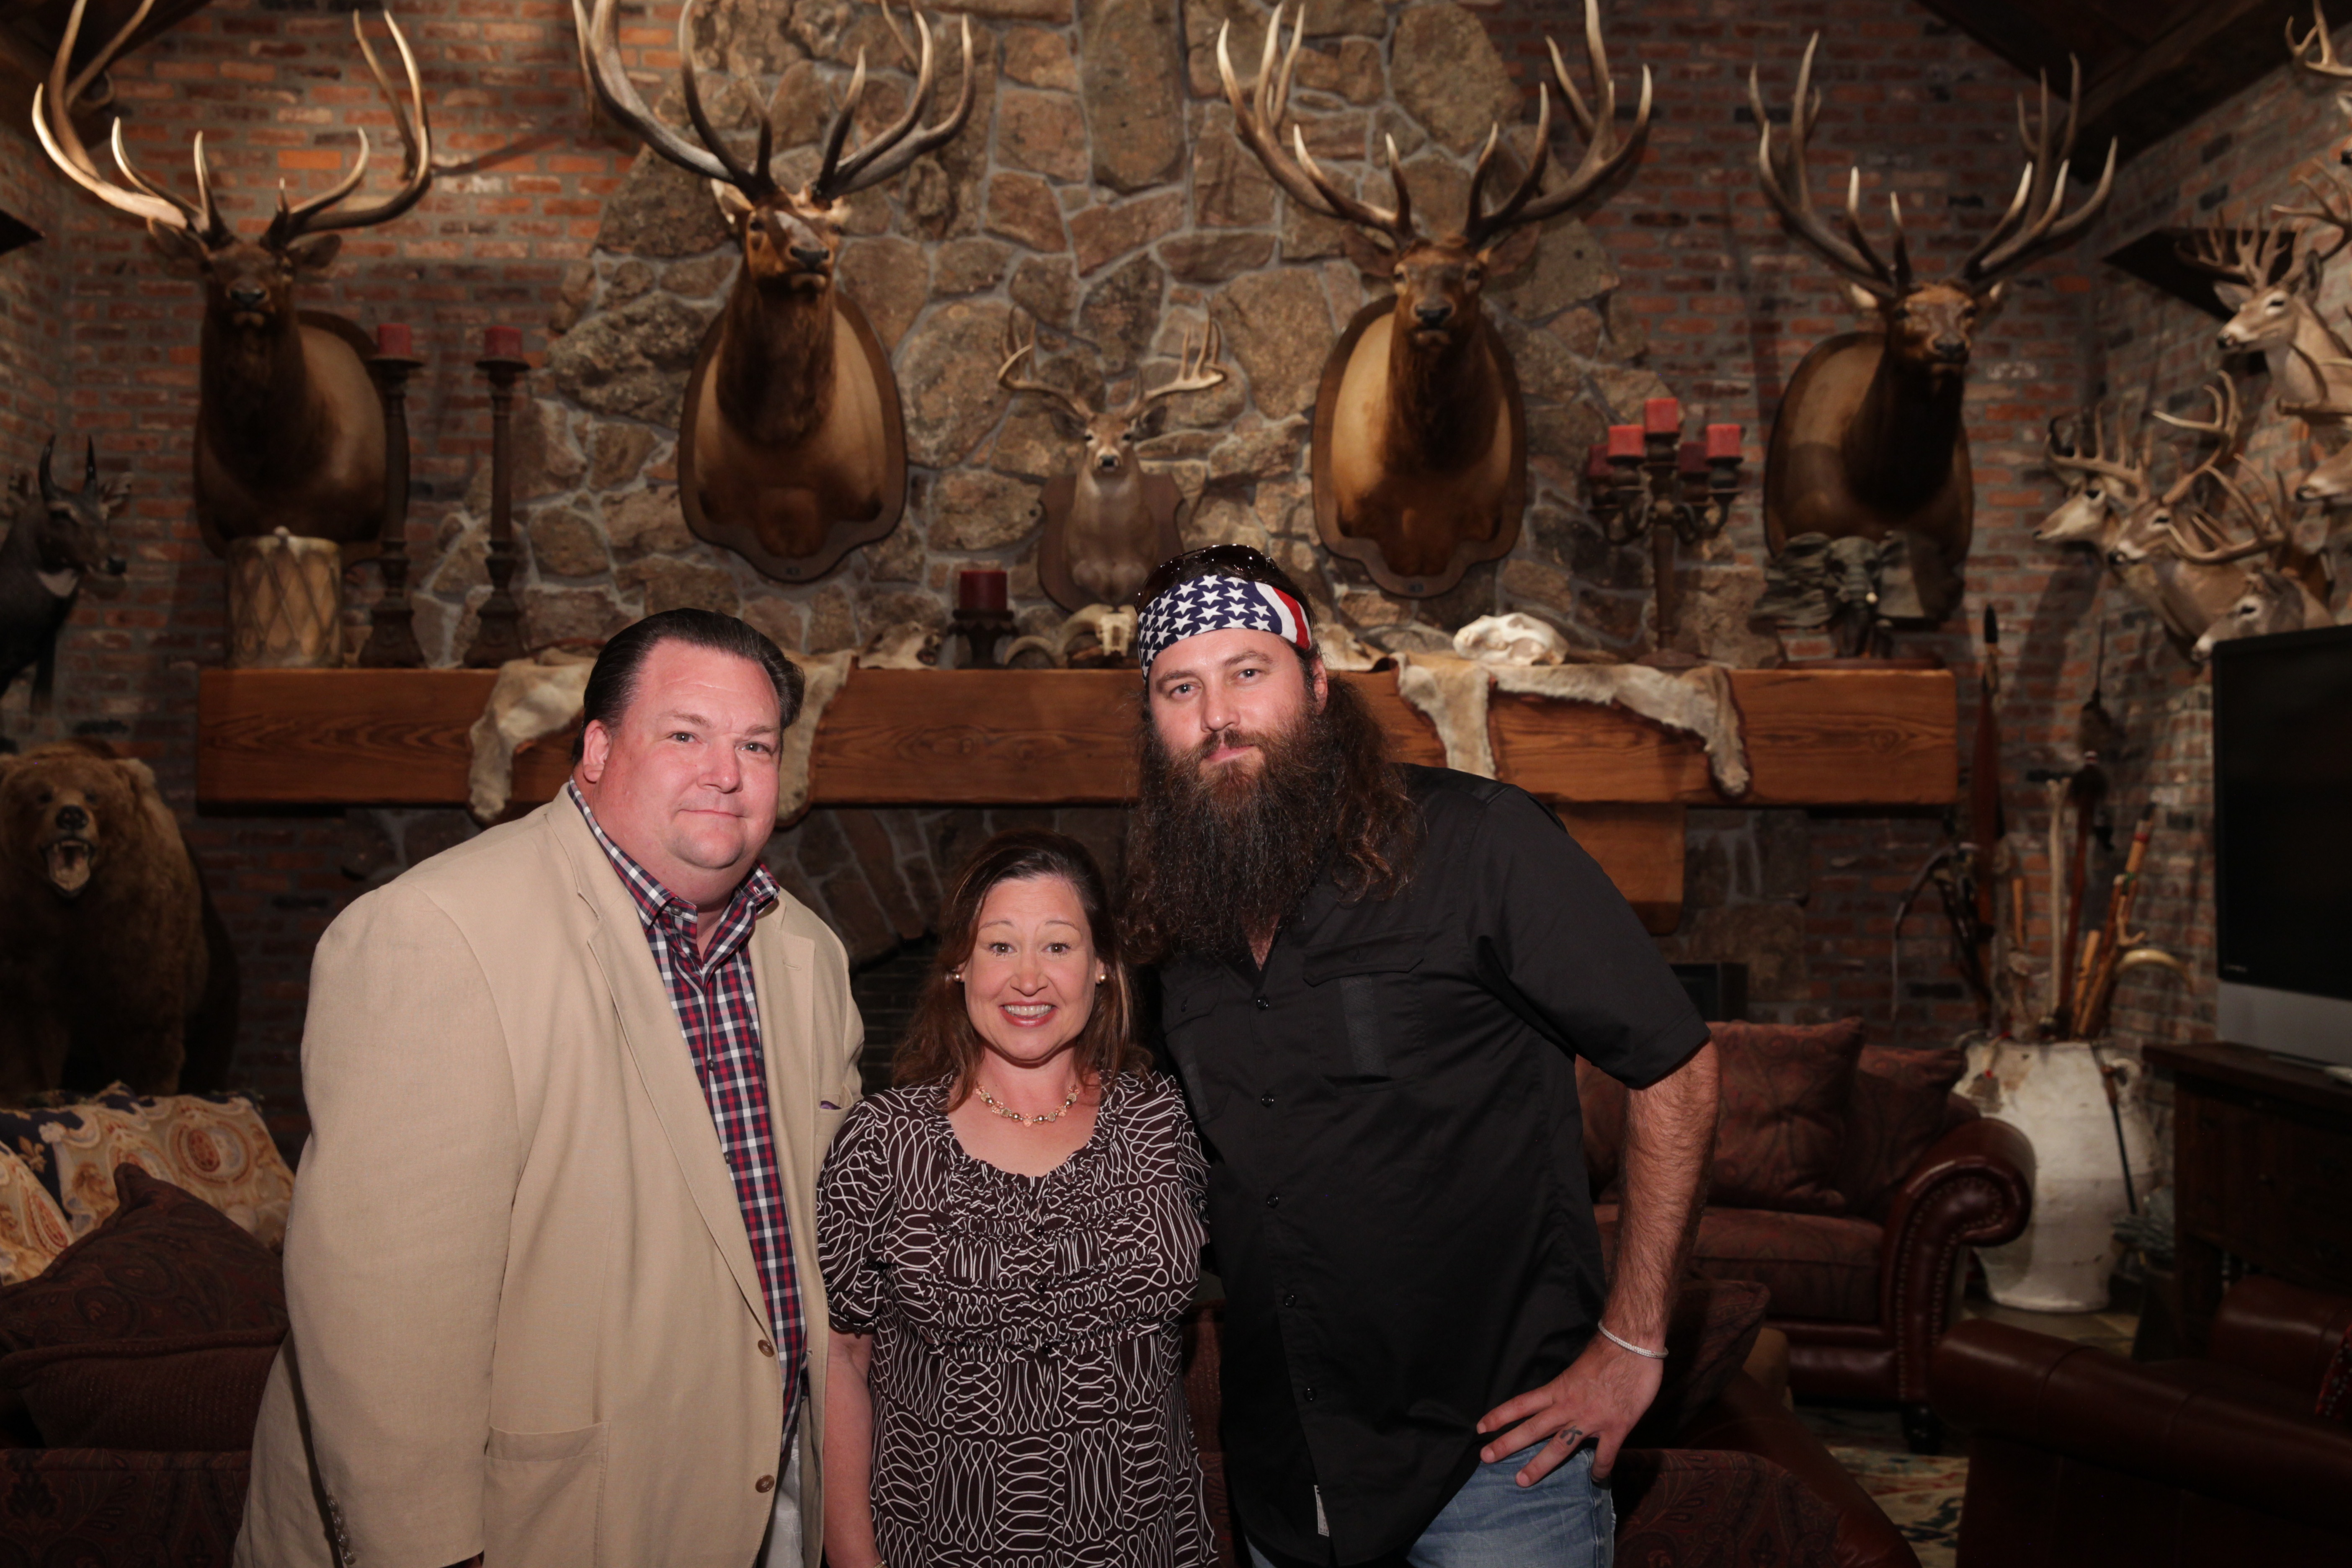 Dr. Sutherlin with Willie Robertson (Duck Dynasty)